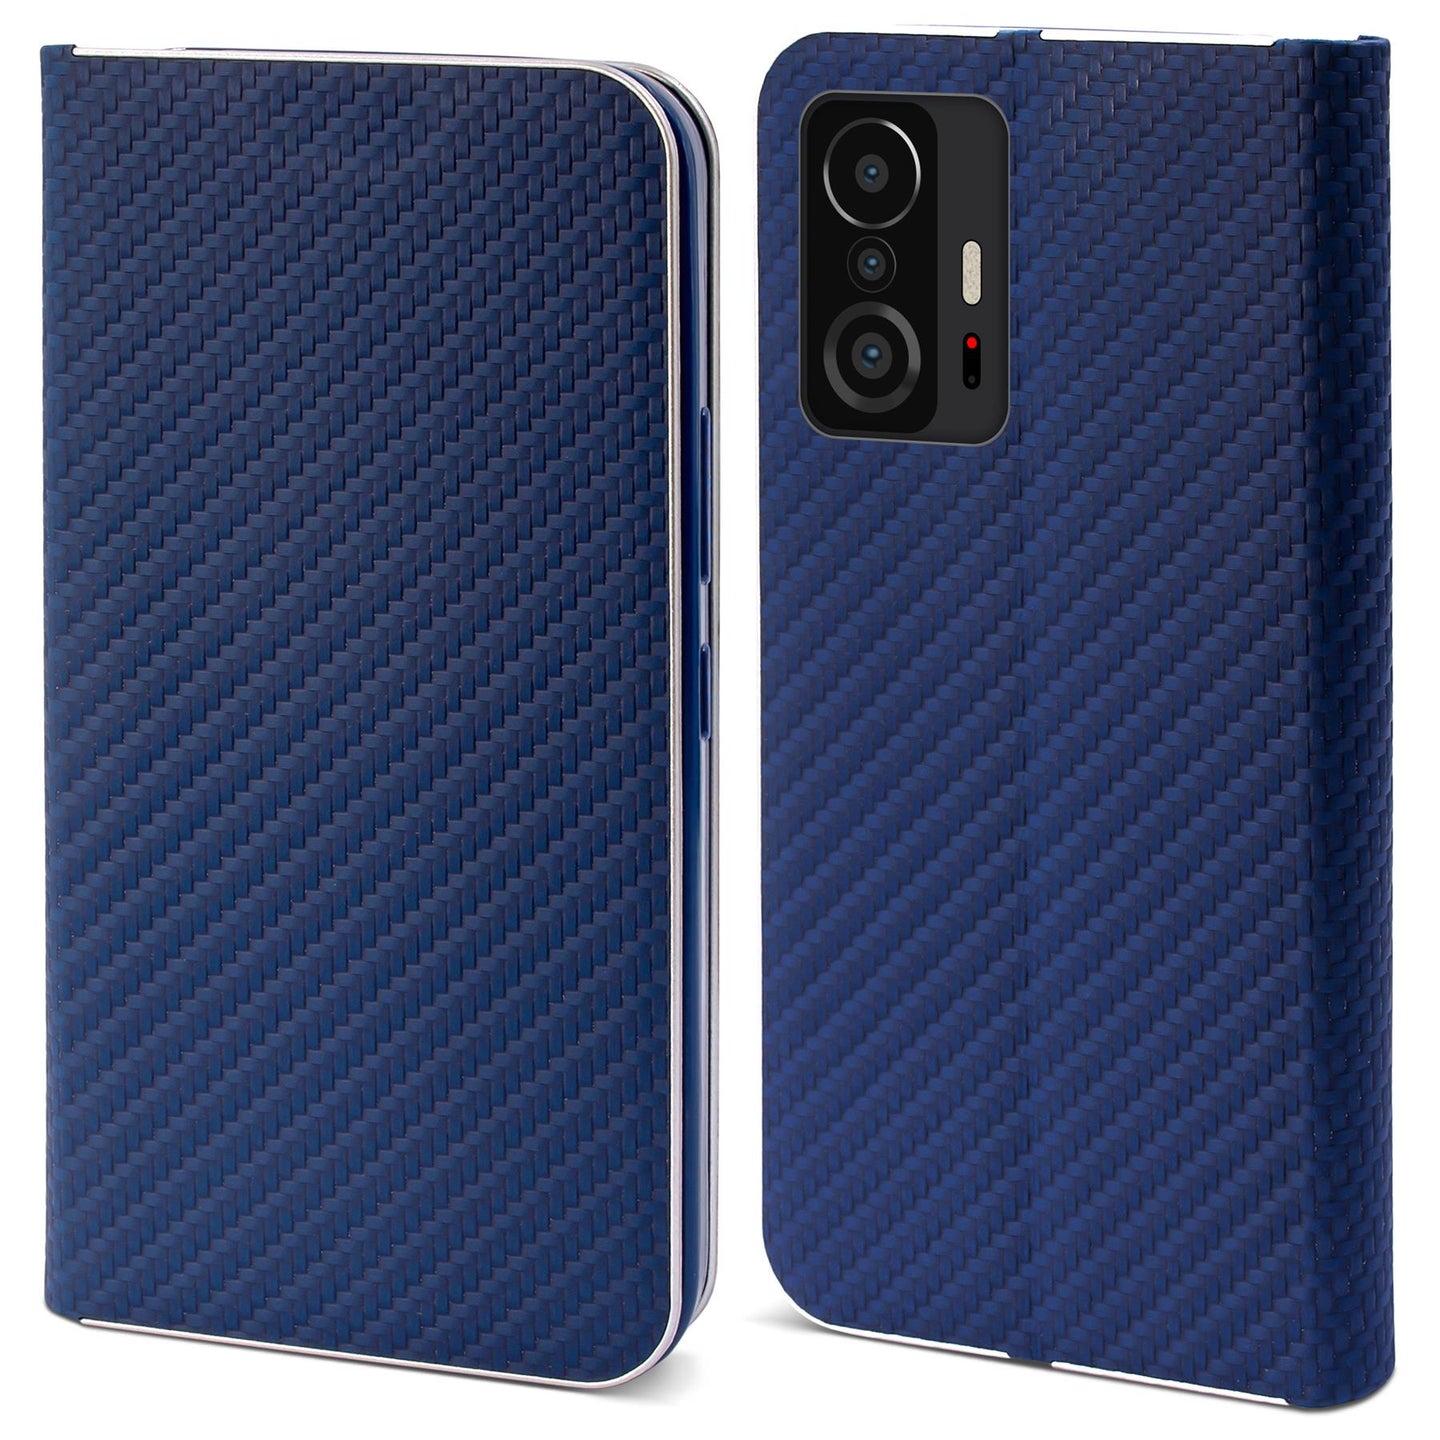 Moozy Wallet Case for Xiaomi 11T and 11T Pro, Dark Blue Carbon - Flip Case with Metallic Border Design Magnetic Closure Flip Cover with Card Holder and Kickstand Function